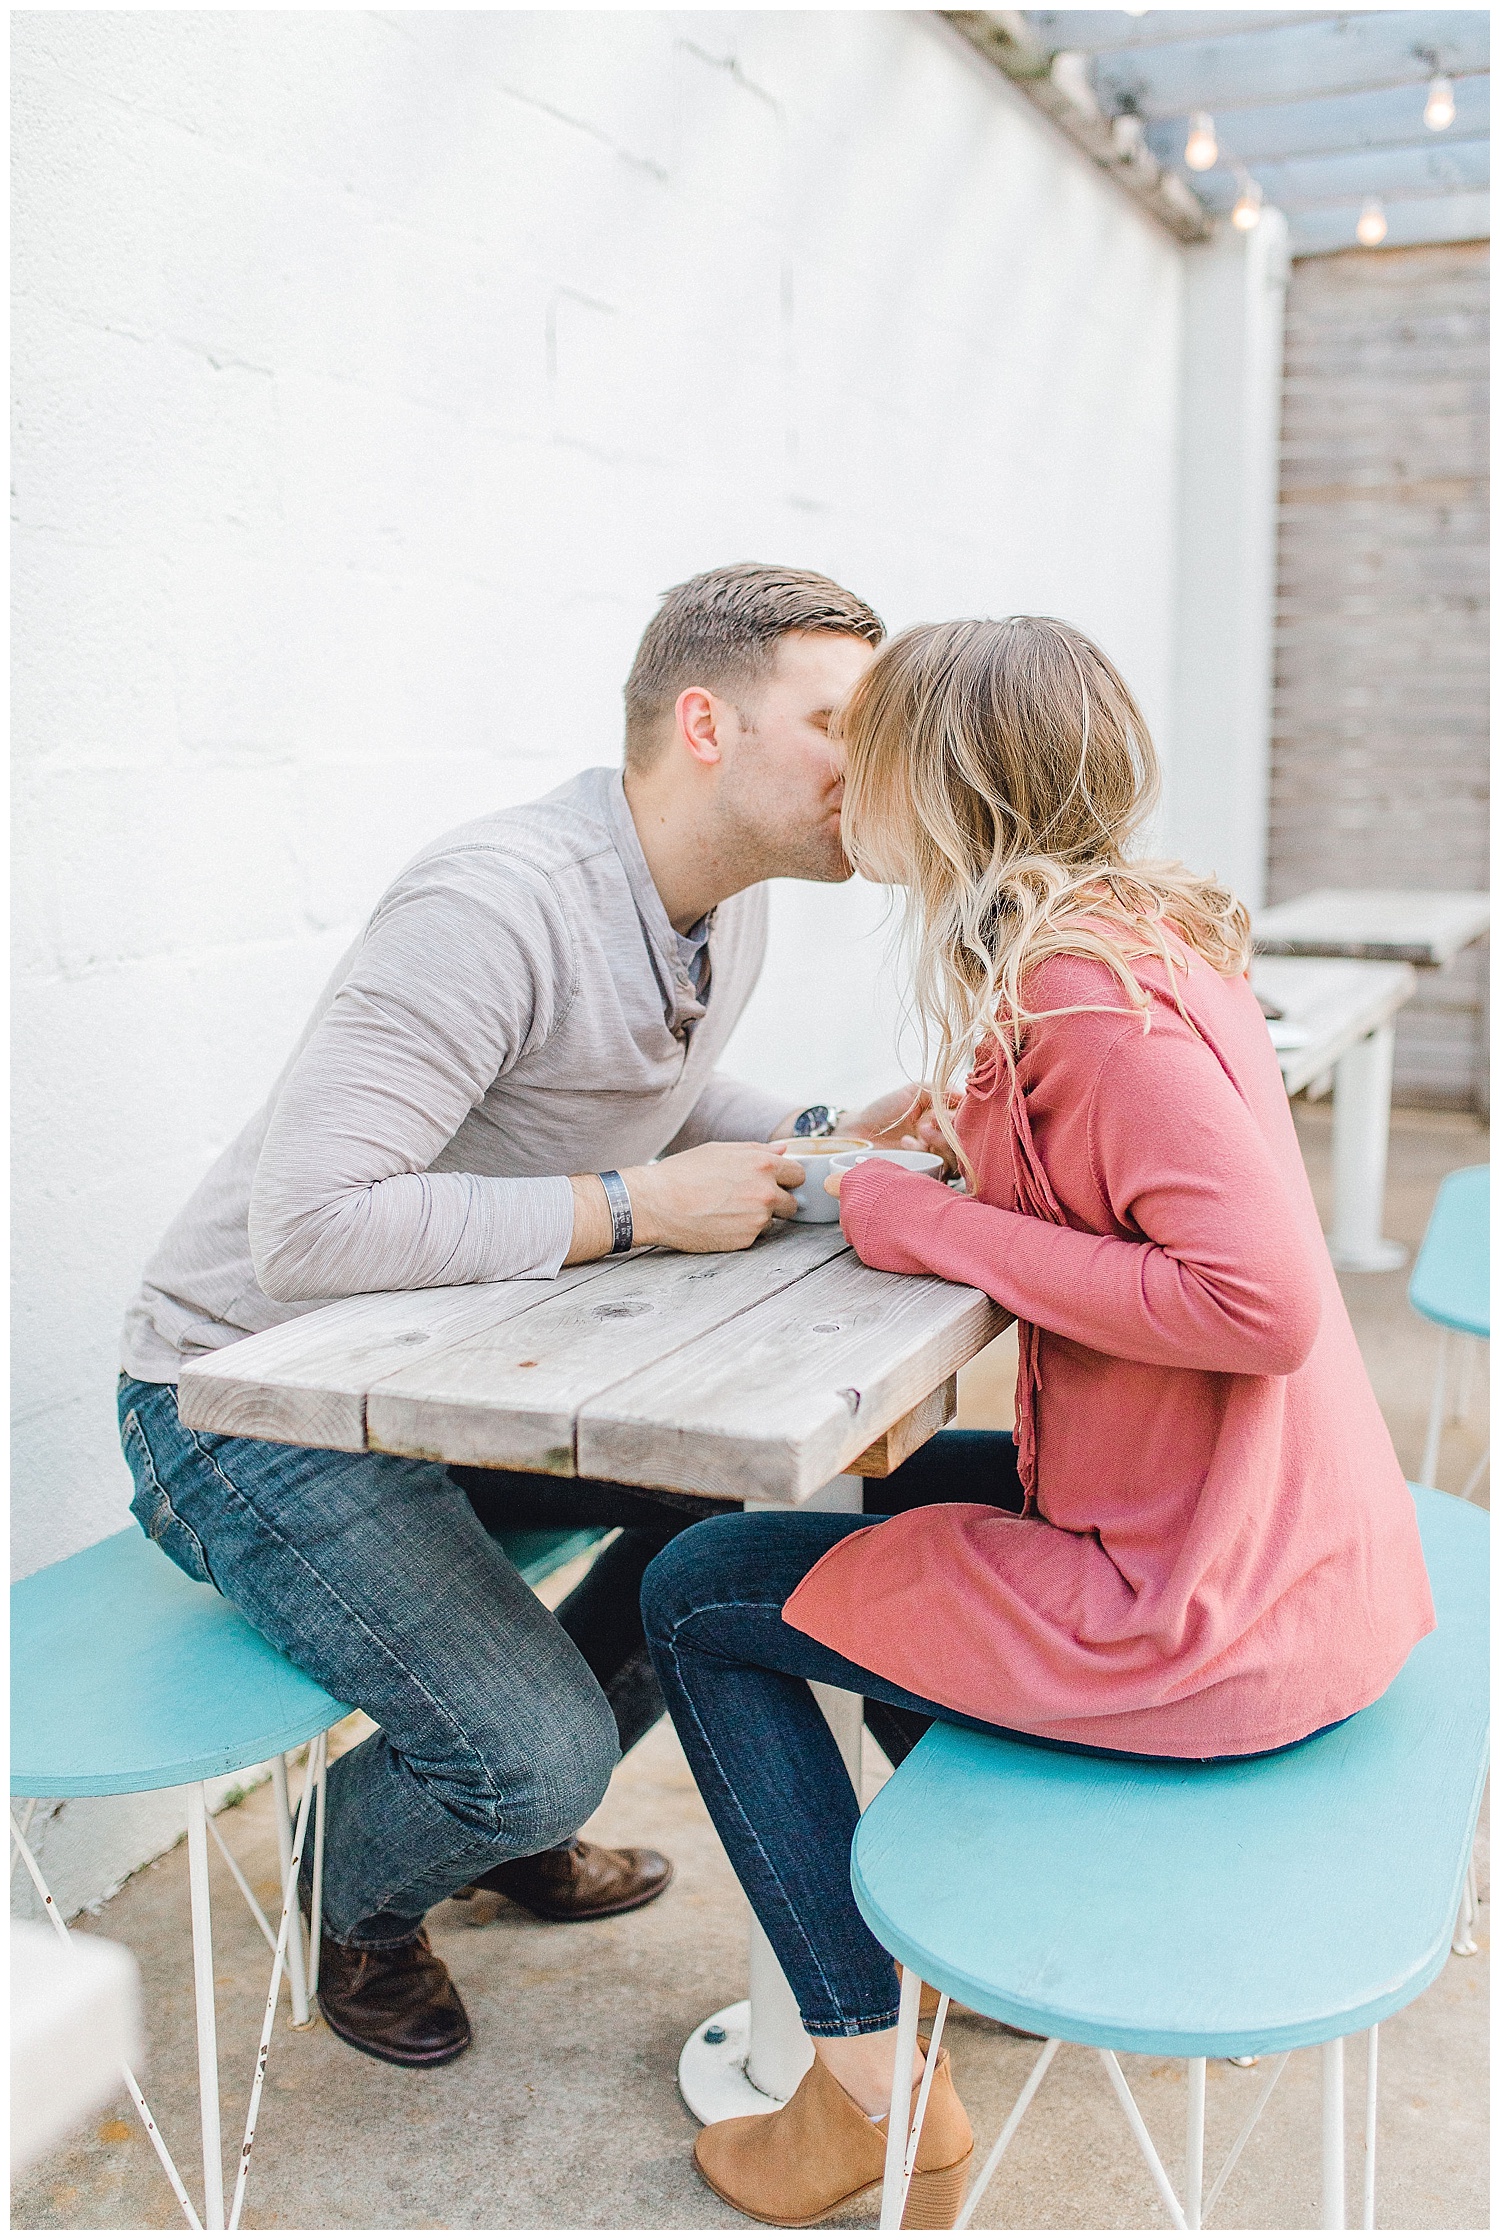 ERC_0933_Downtown Nashville Engagement Session at Barista Parlor | Emma Rose Company Wedding Photographer | Outfit Inspiration for Engagement Session | Kindred Light and Airy Photographer.jpg